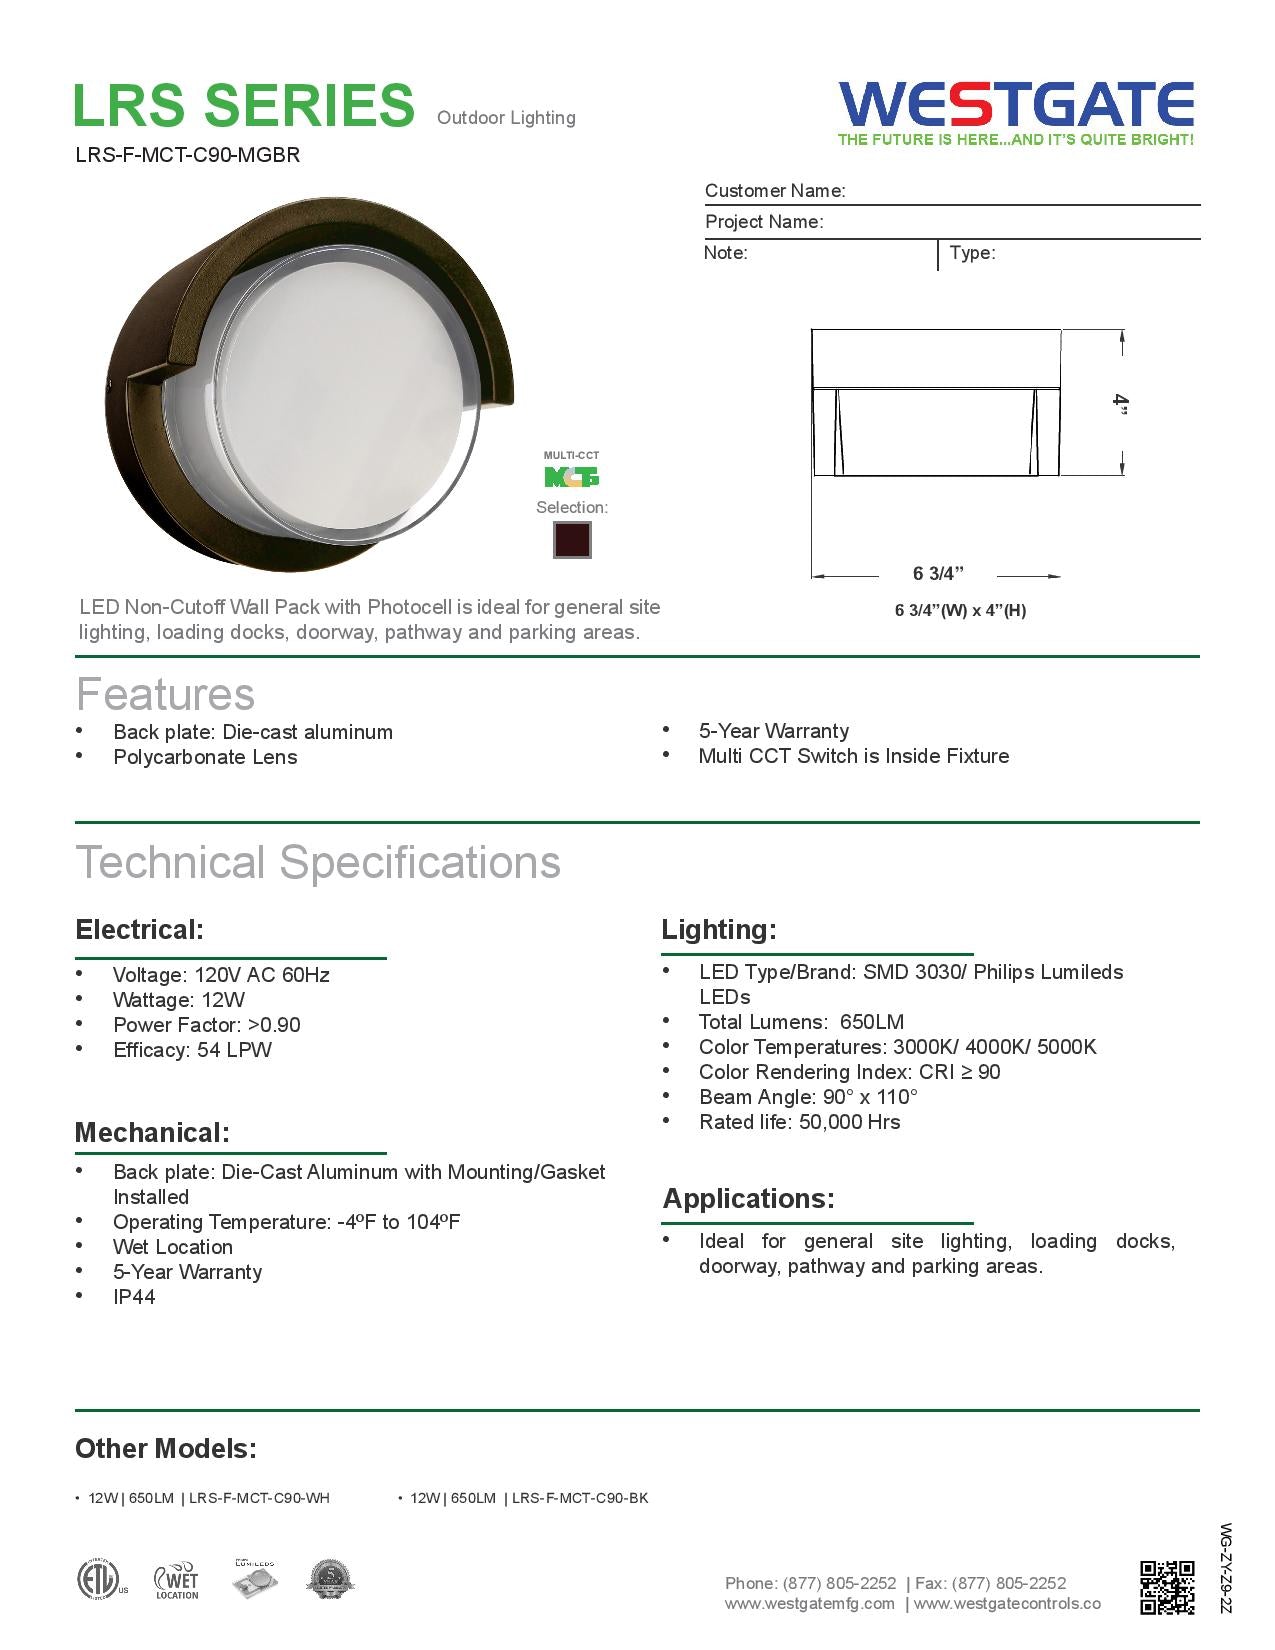 LRS-F LED Multi-CCT Architectural Wall Light With Dual Lens - WESTGATE